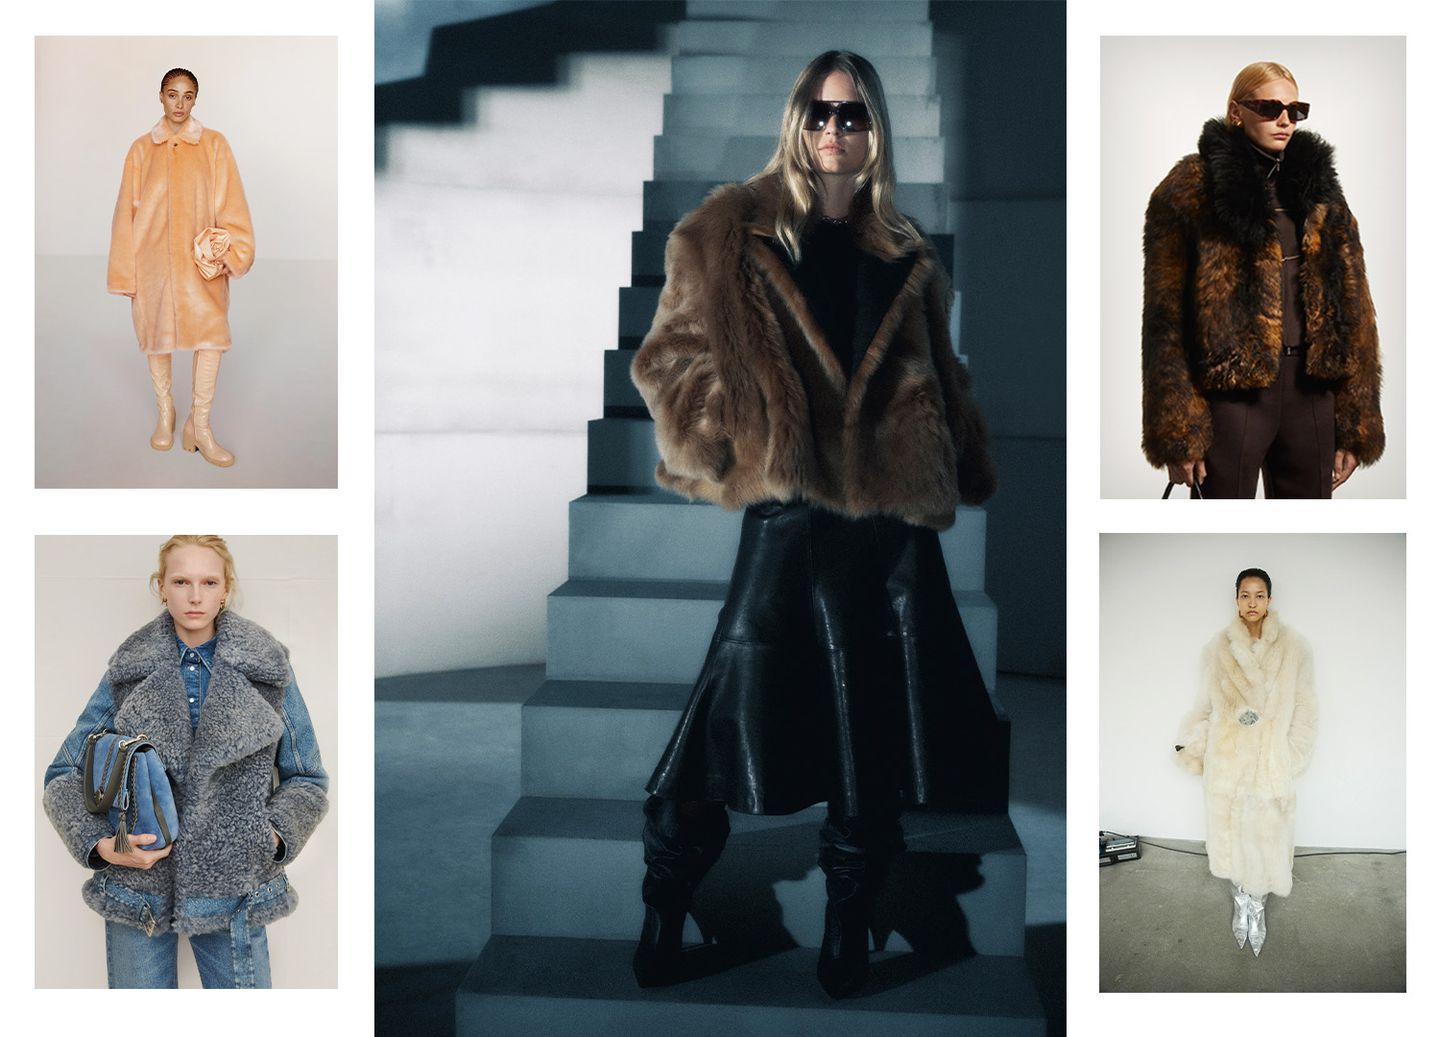 The Mob Wife Aesthetic Doesn't Own Faux Fur Coats | Marie Claire